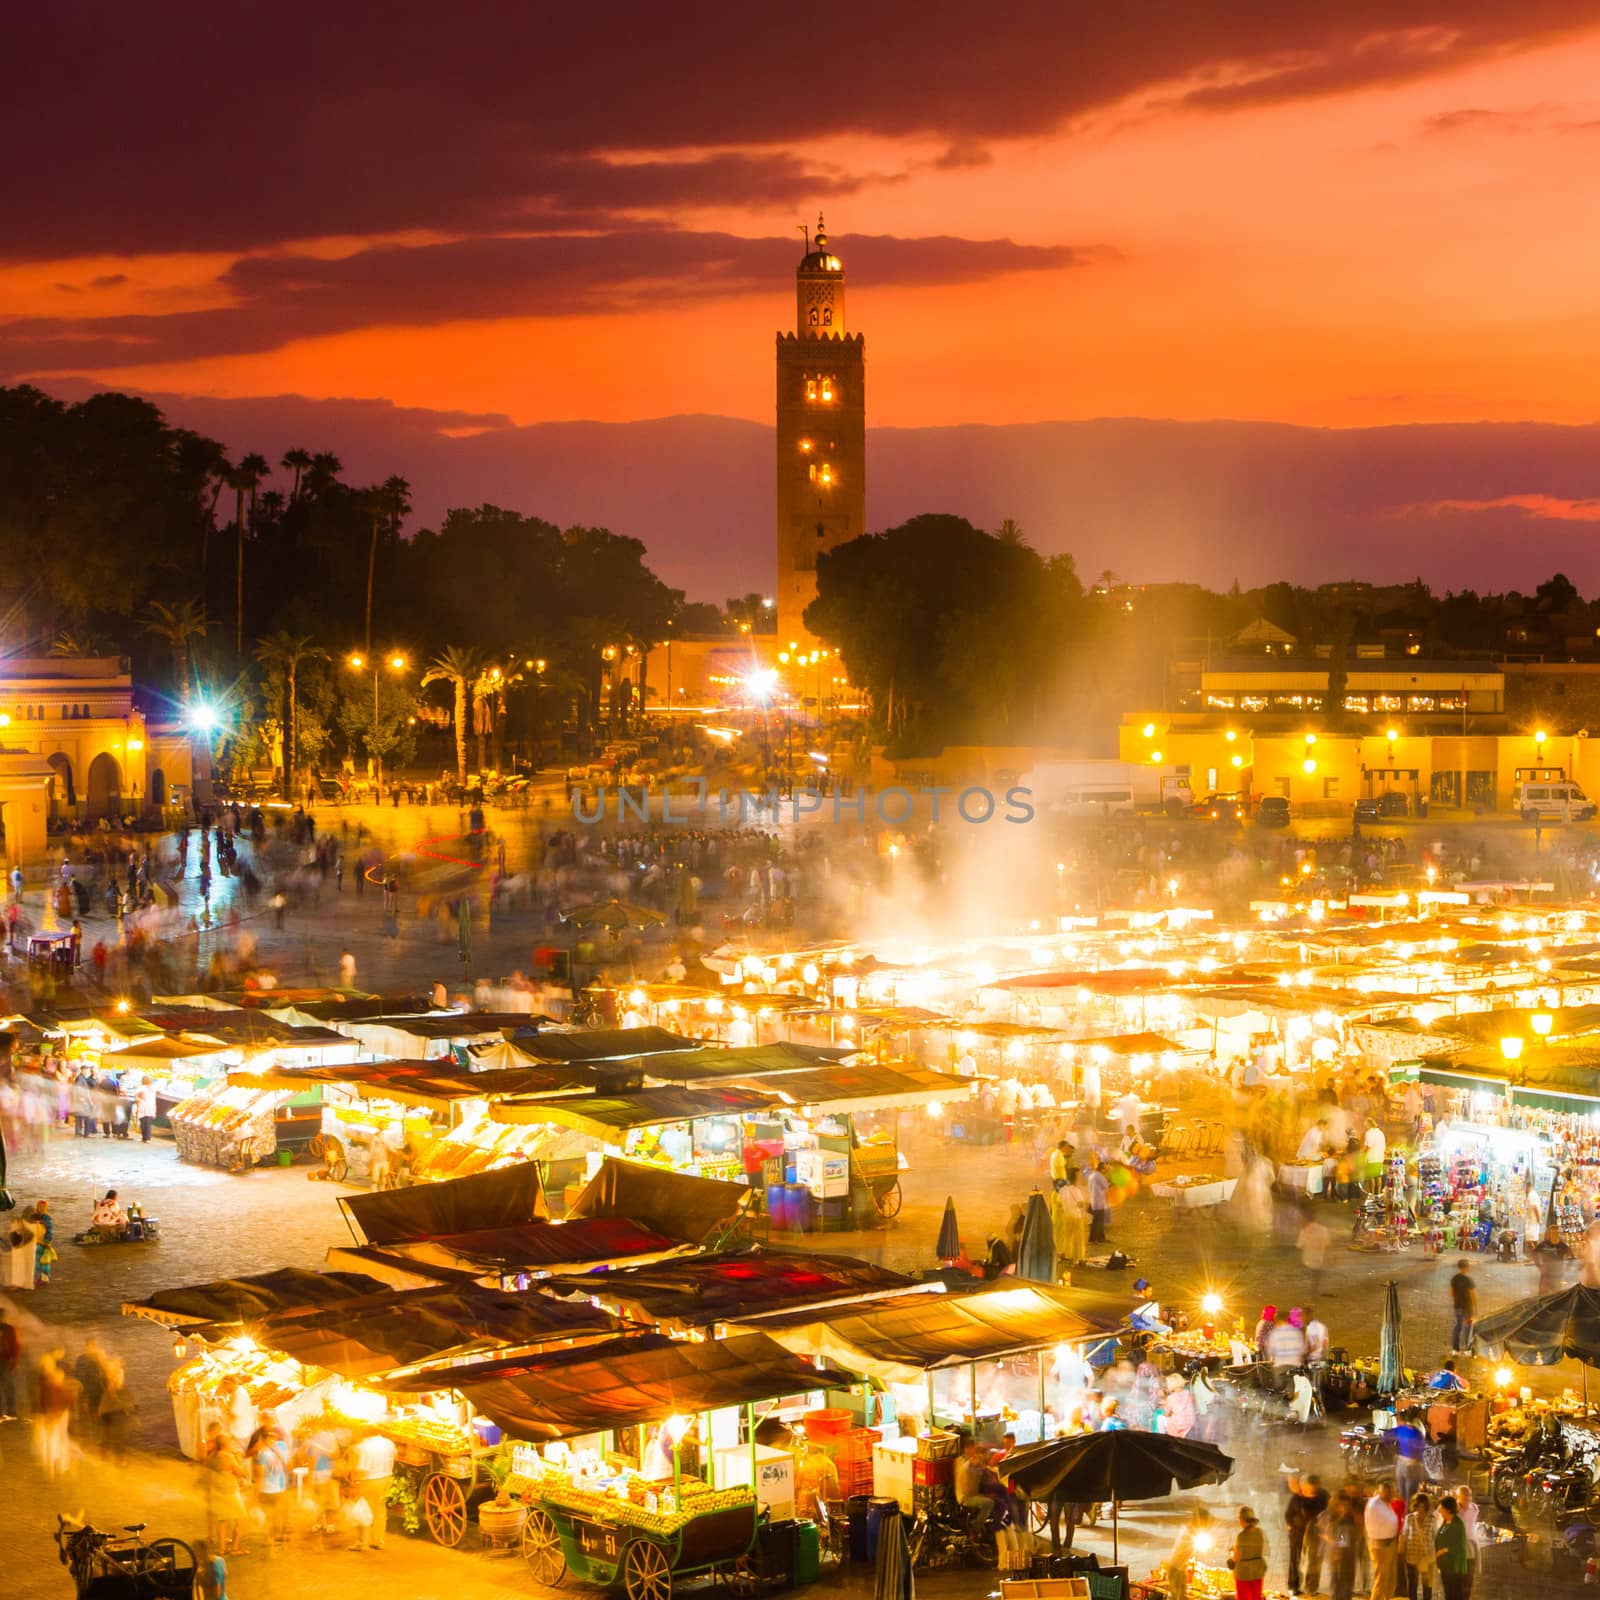 Jamaa el Fna also Jemaa el Fnaa, Djema el Fna or Djemaa el Fnaa is a square and market place in Marrakesh's medina quarter (old city). Marrakesh, Morocco, north Africa. UNESCO Masterpiece of the Oral and Intangible Heritage of Humanity.